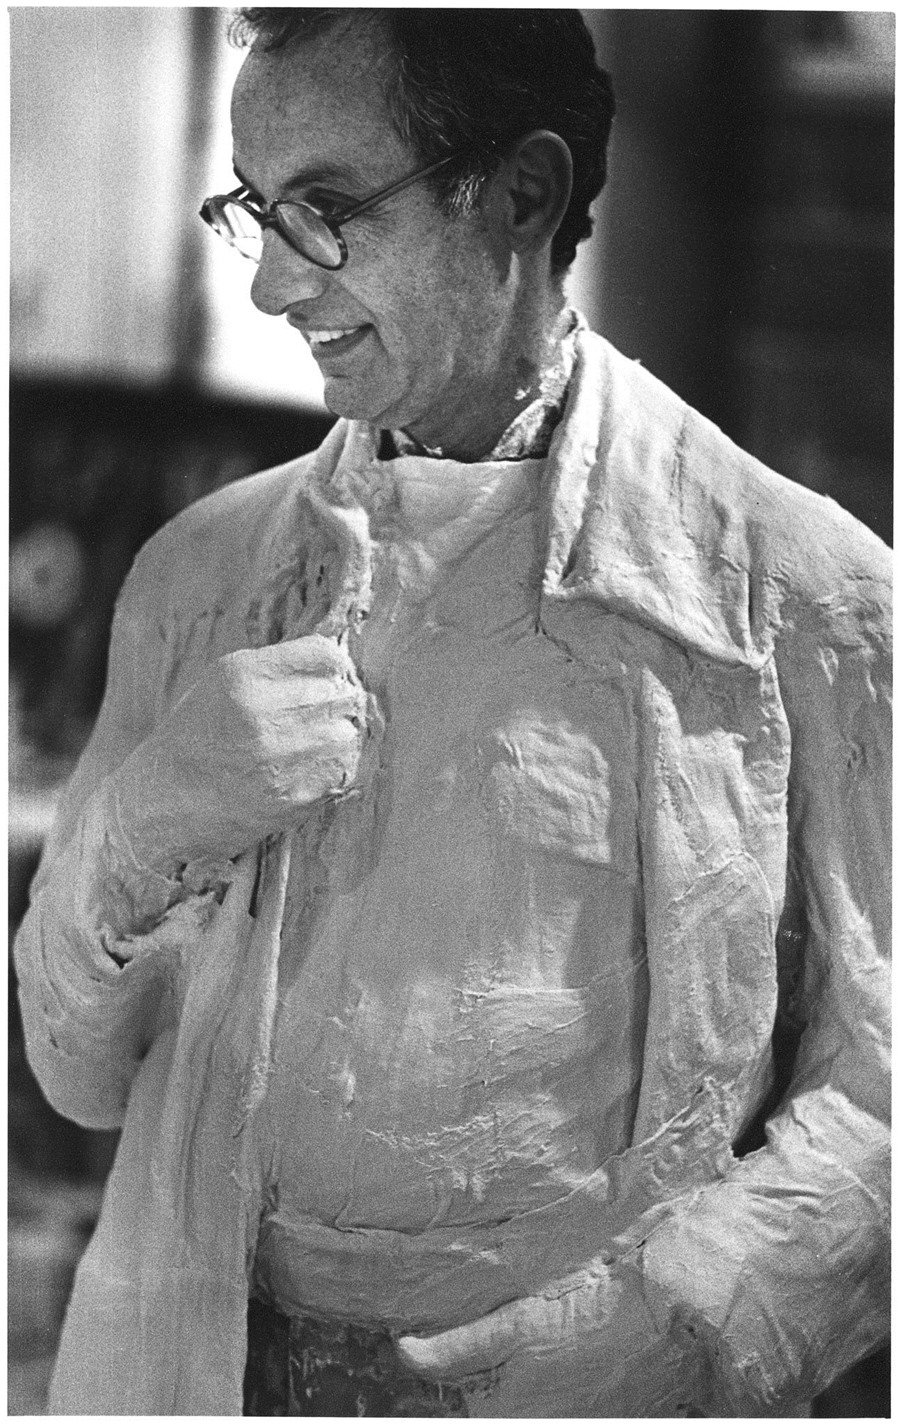 Friedman poses for a plaster sculpture by George Segal, 1978. Photo courtesy Walker Art Center.